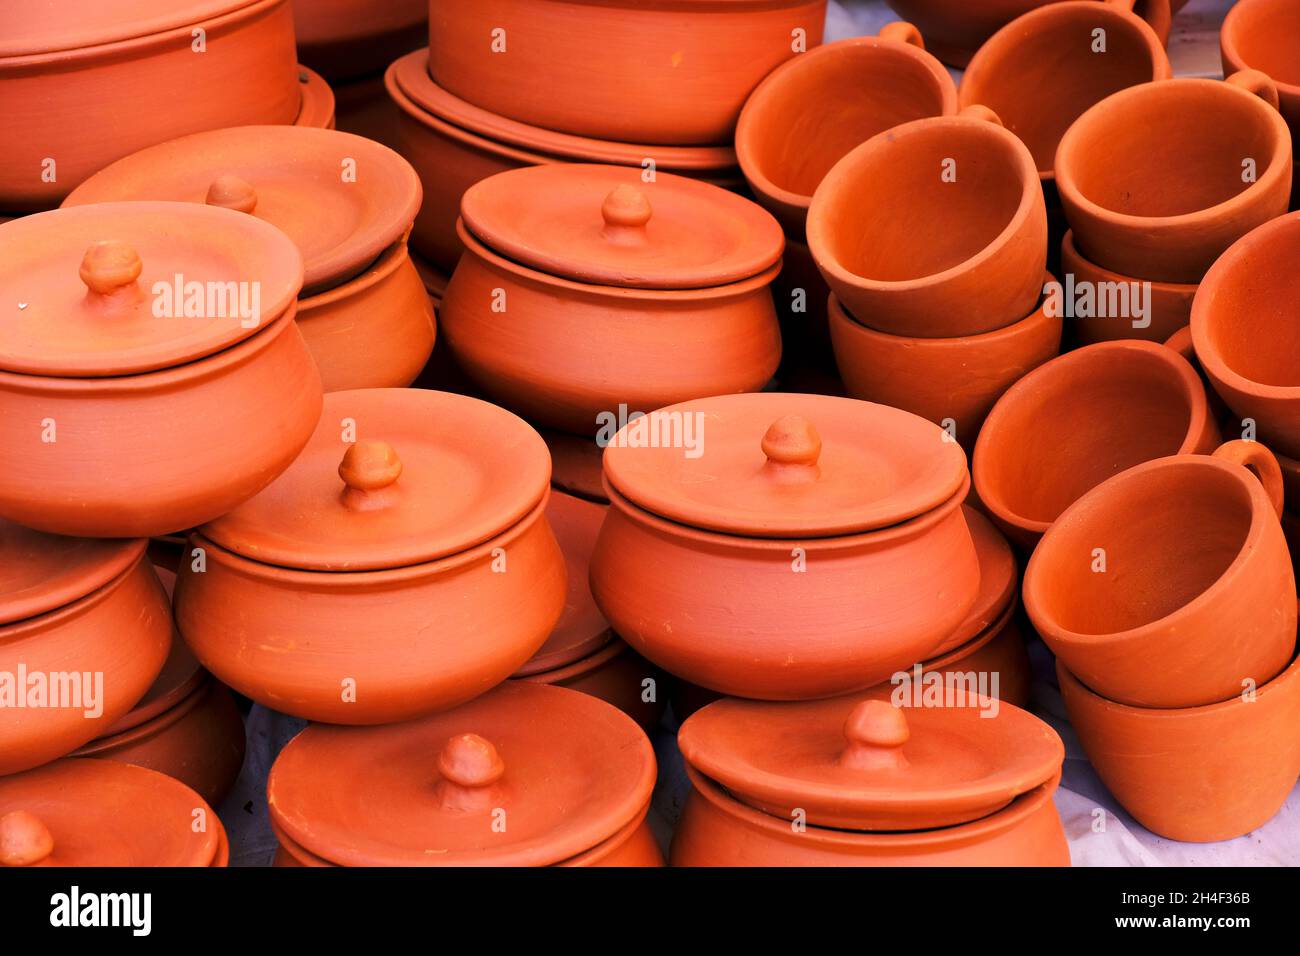 Indian Made Clay Pressure Cooker Stock Photo - Image of accessory